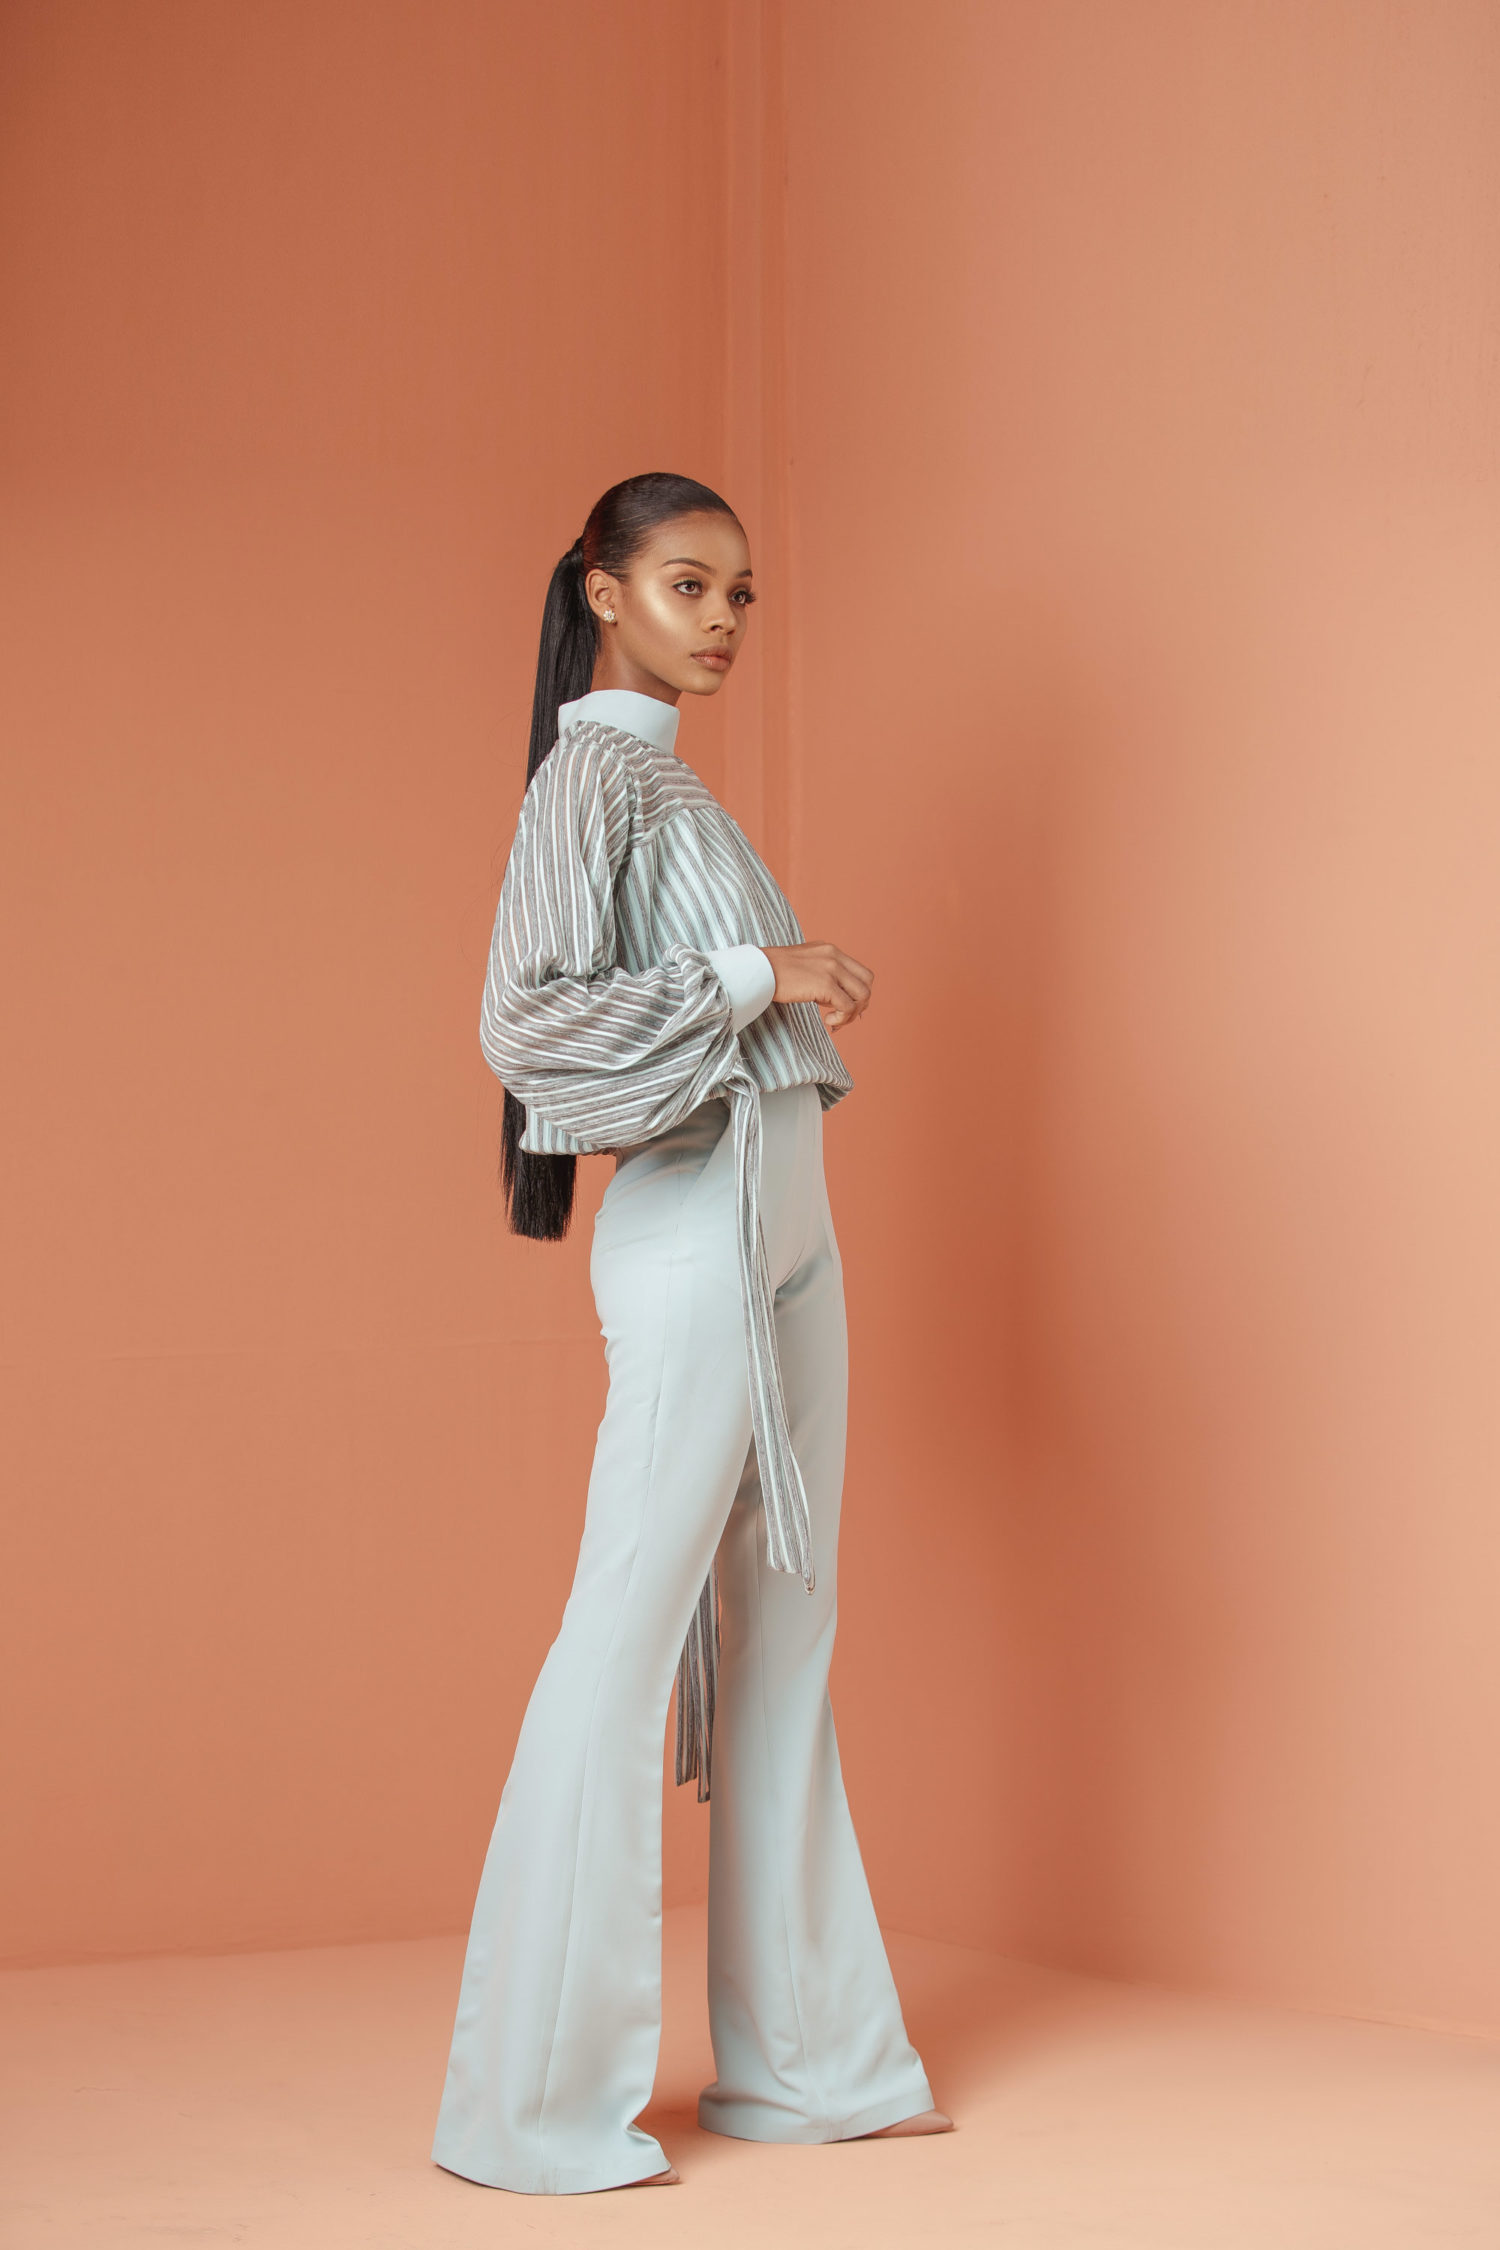 Knanfe: The New Uber-Chic Brand You'll Actually Love | BN Style